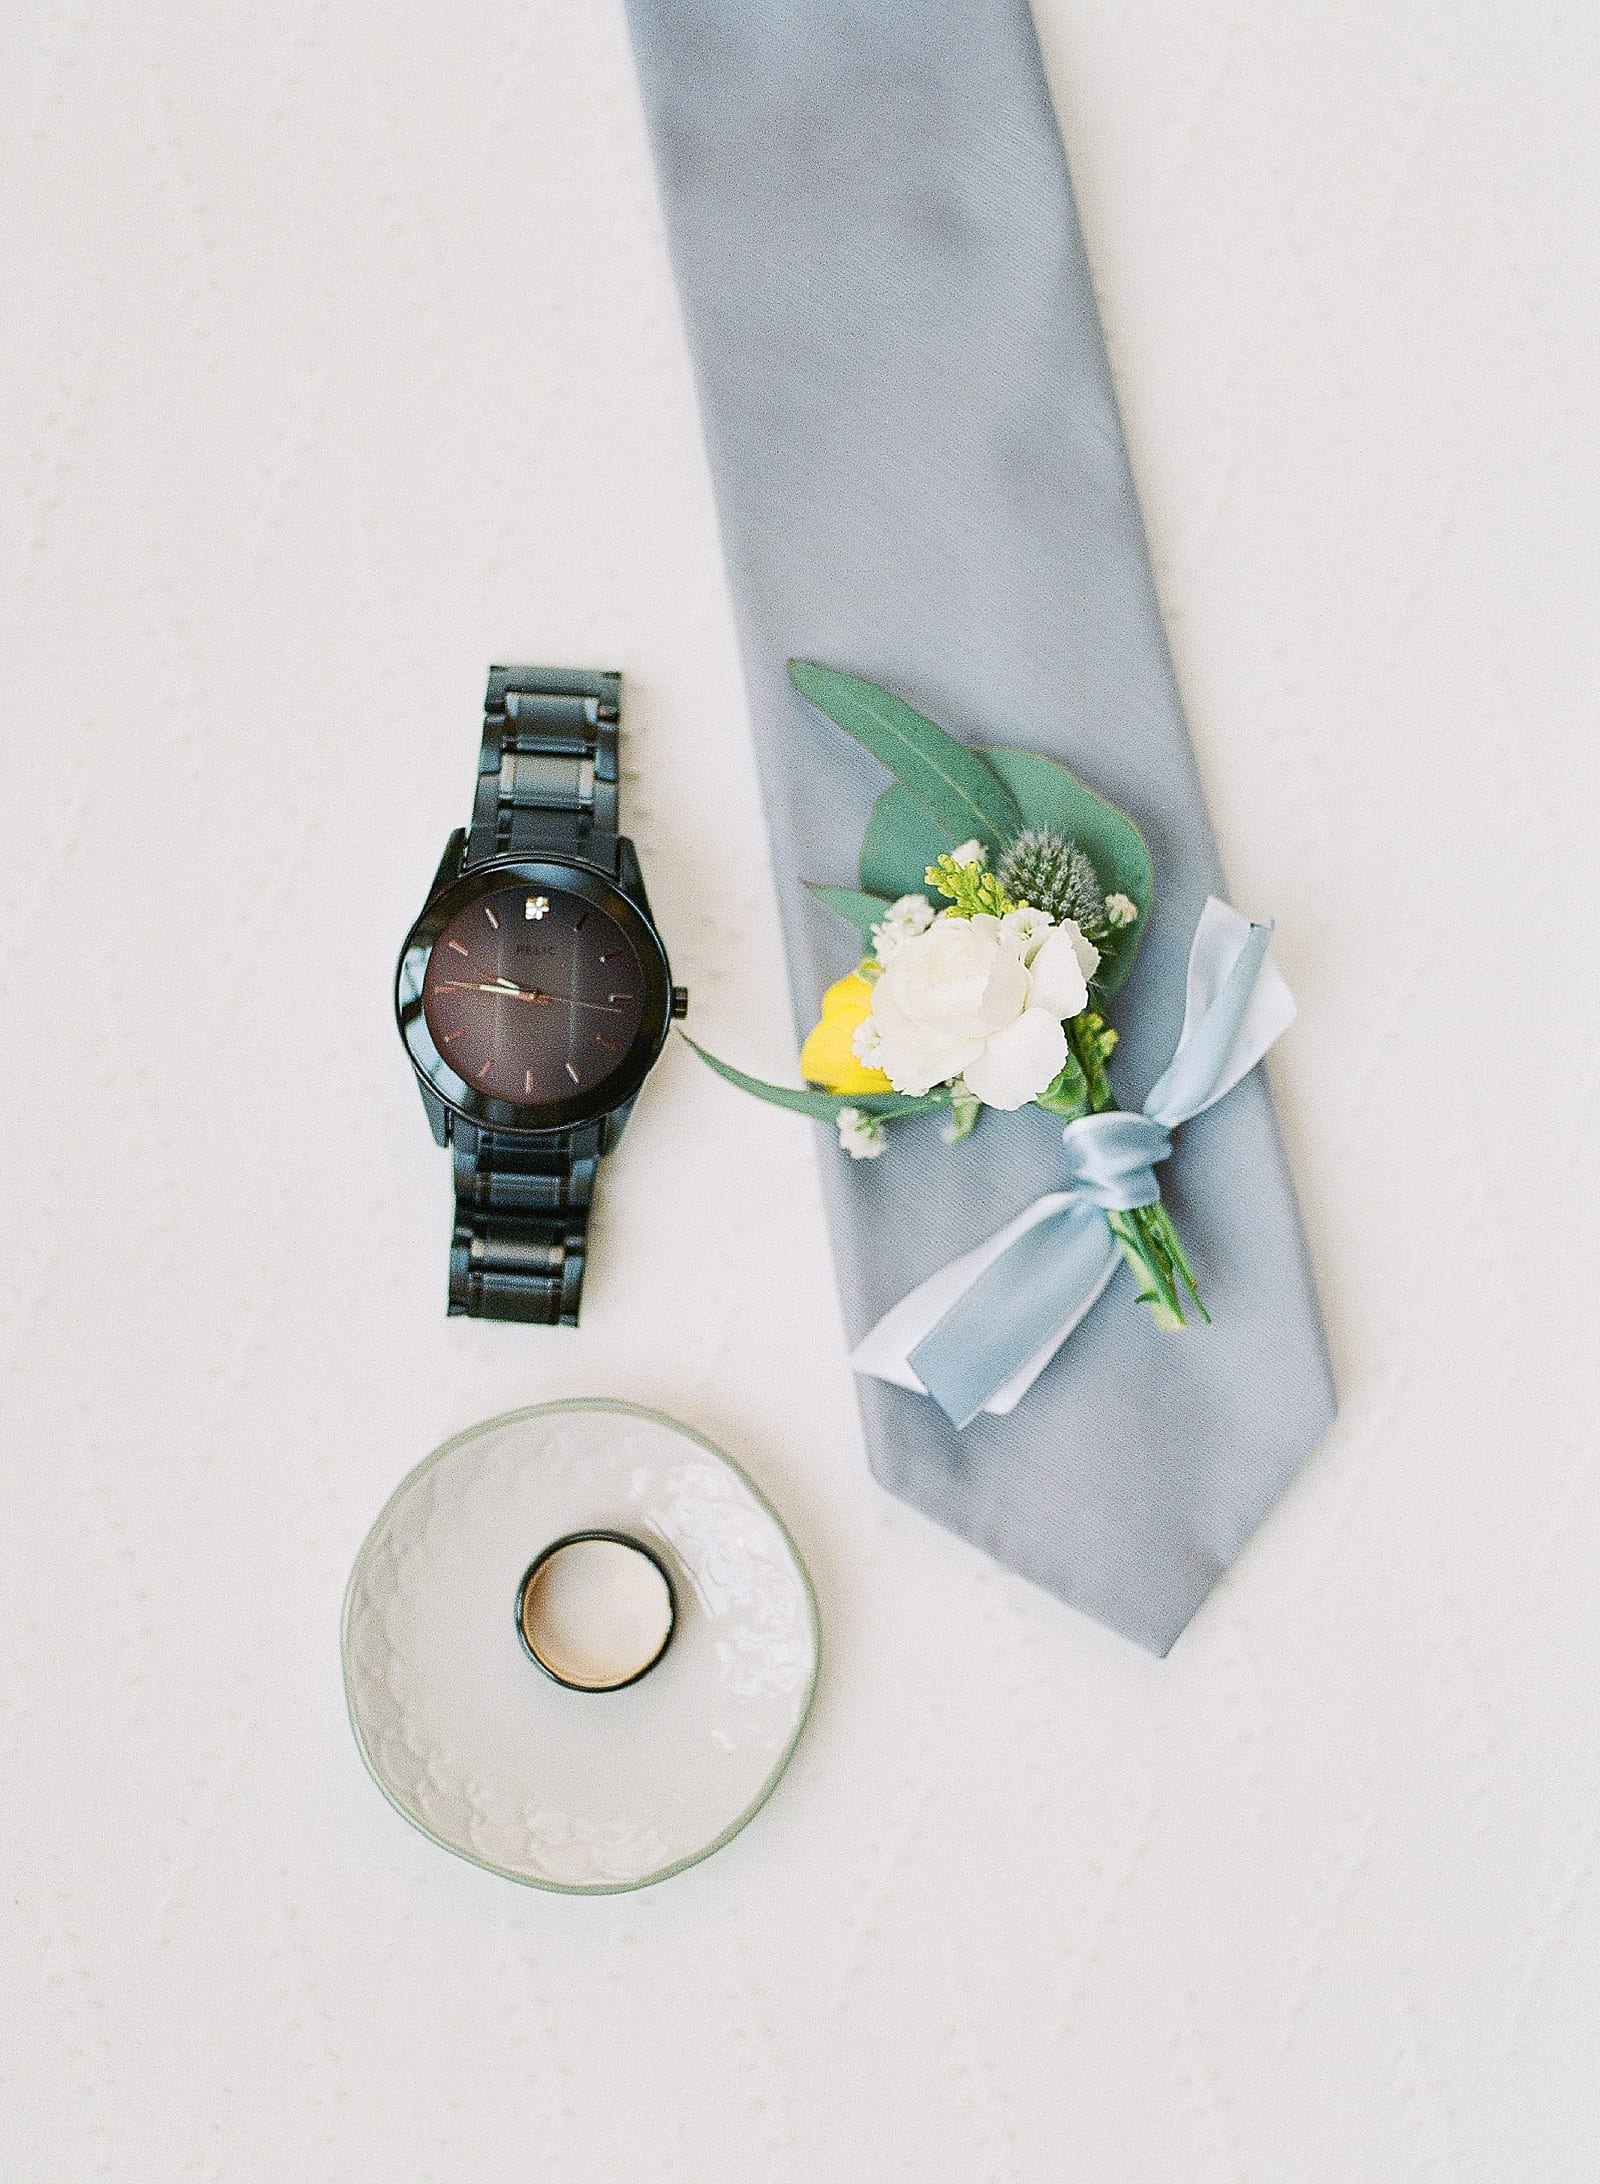 Groom's Details Watch, Tie, Ring, Boutonniere Photo